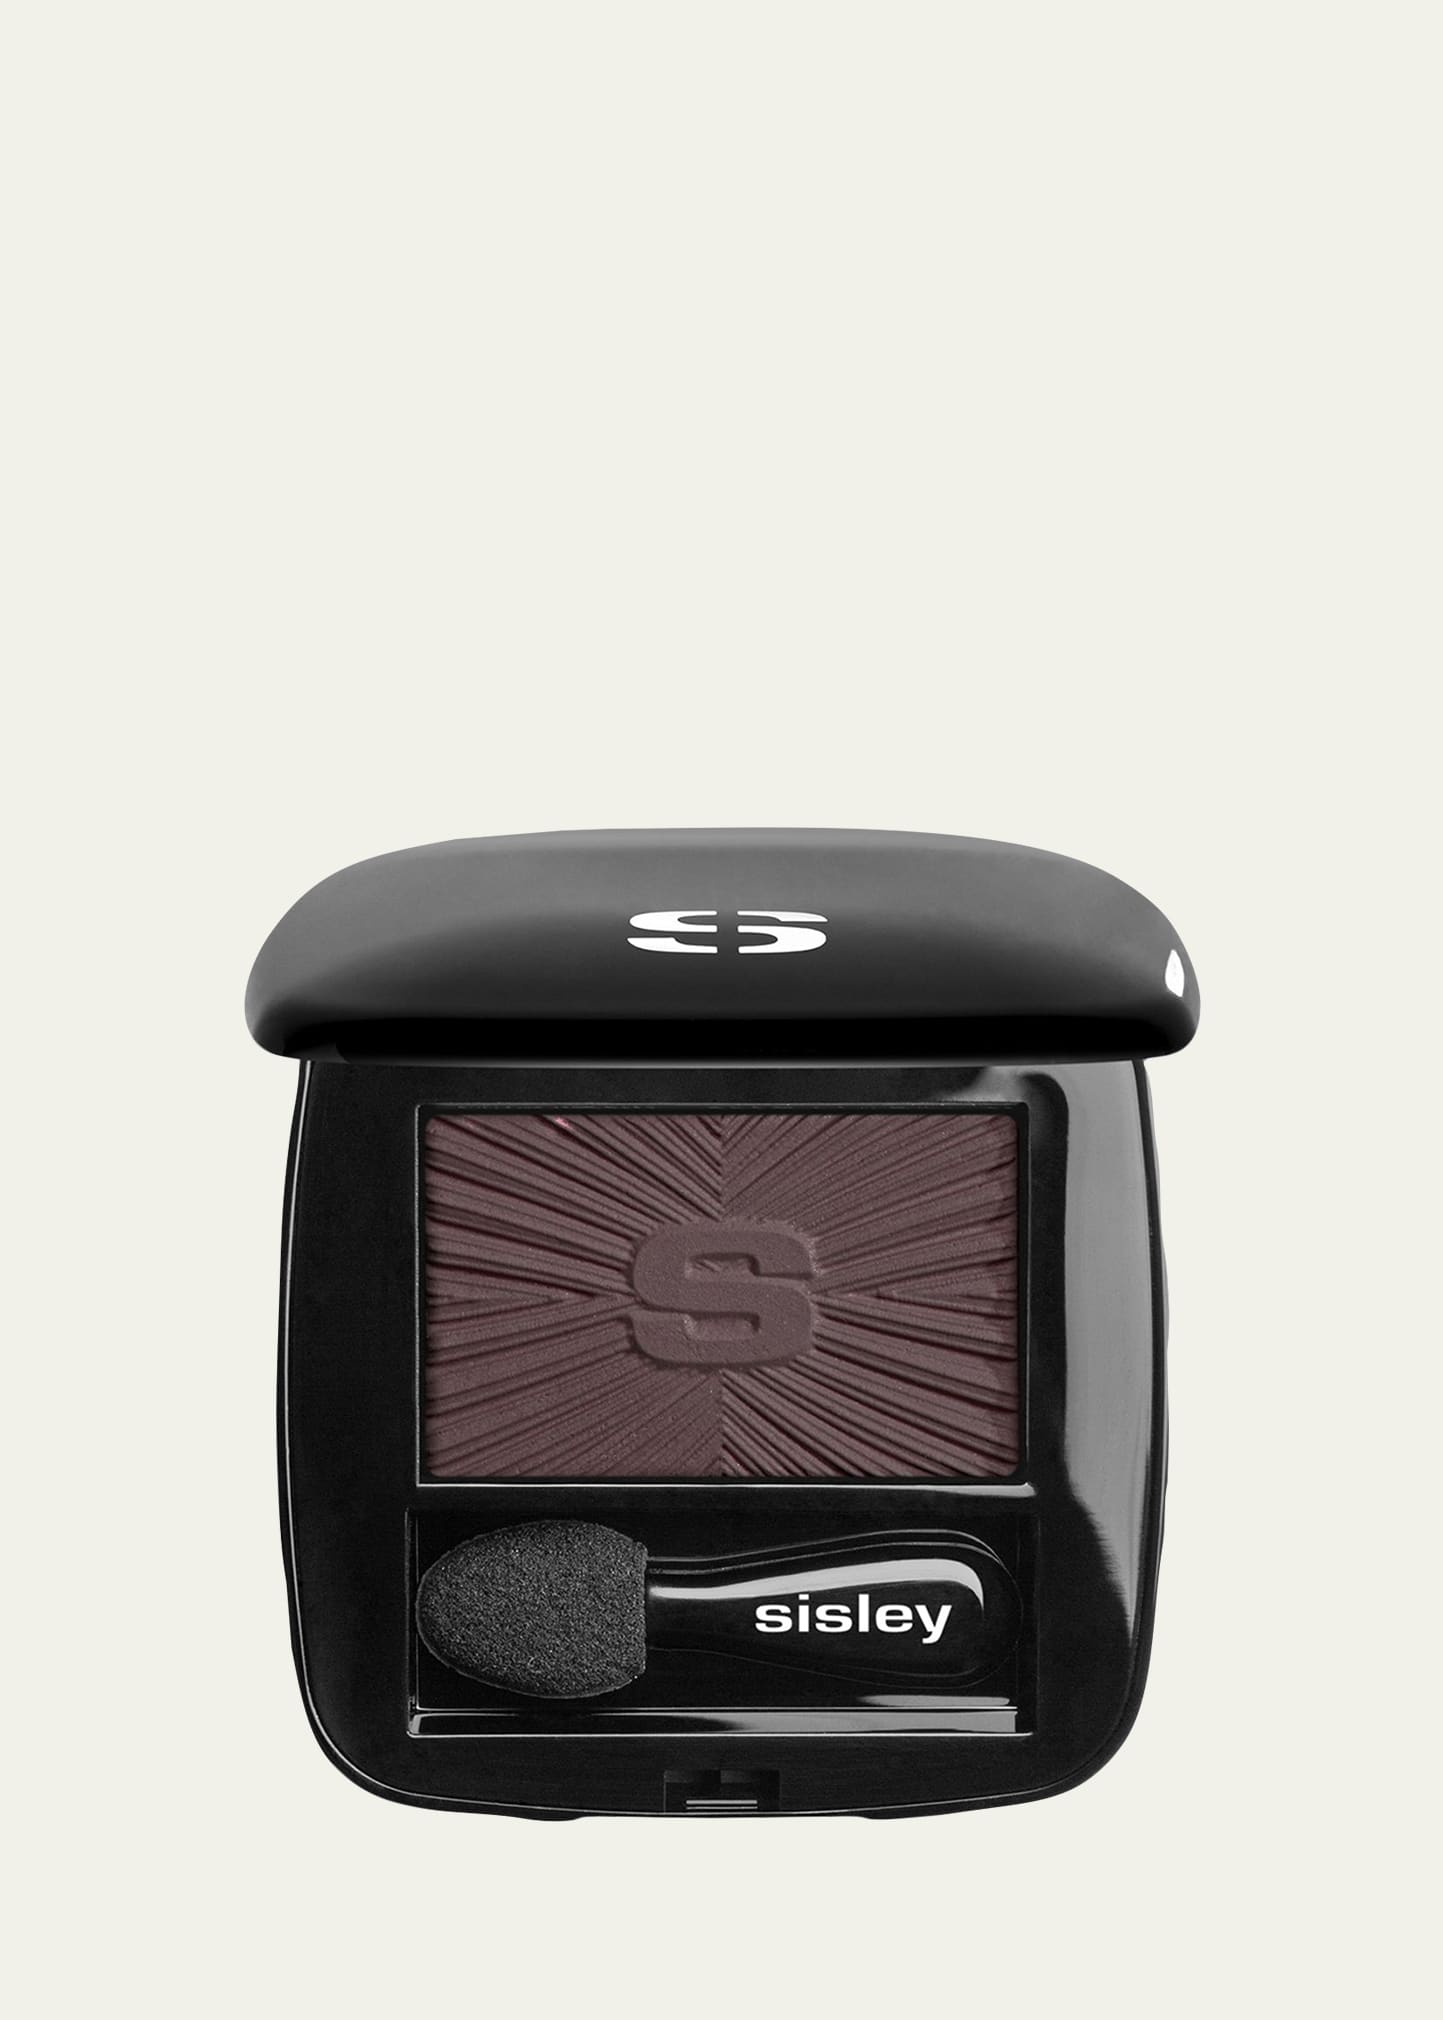 Sisley Paris Les Phyto Ombres Eyeshadow In 21 Matte Cocoa